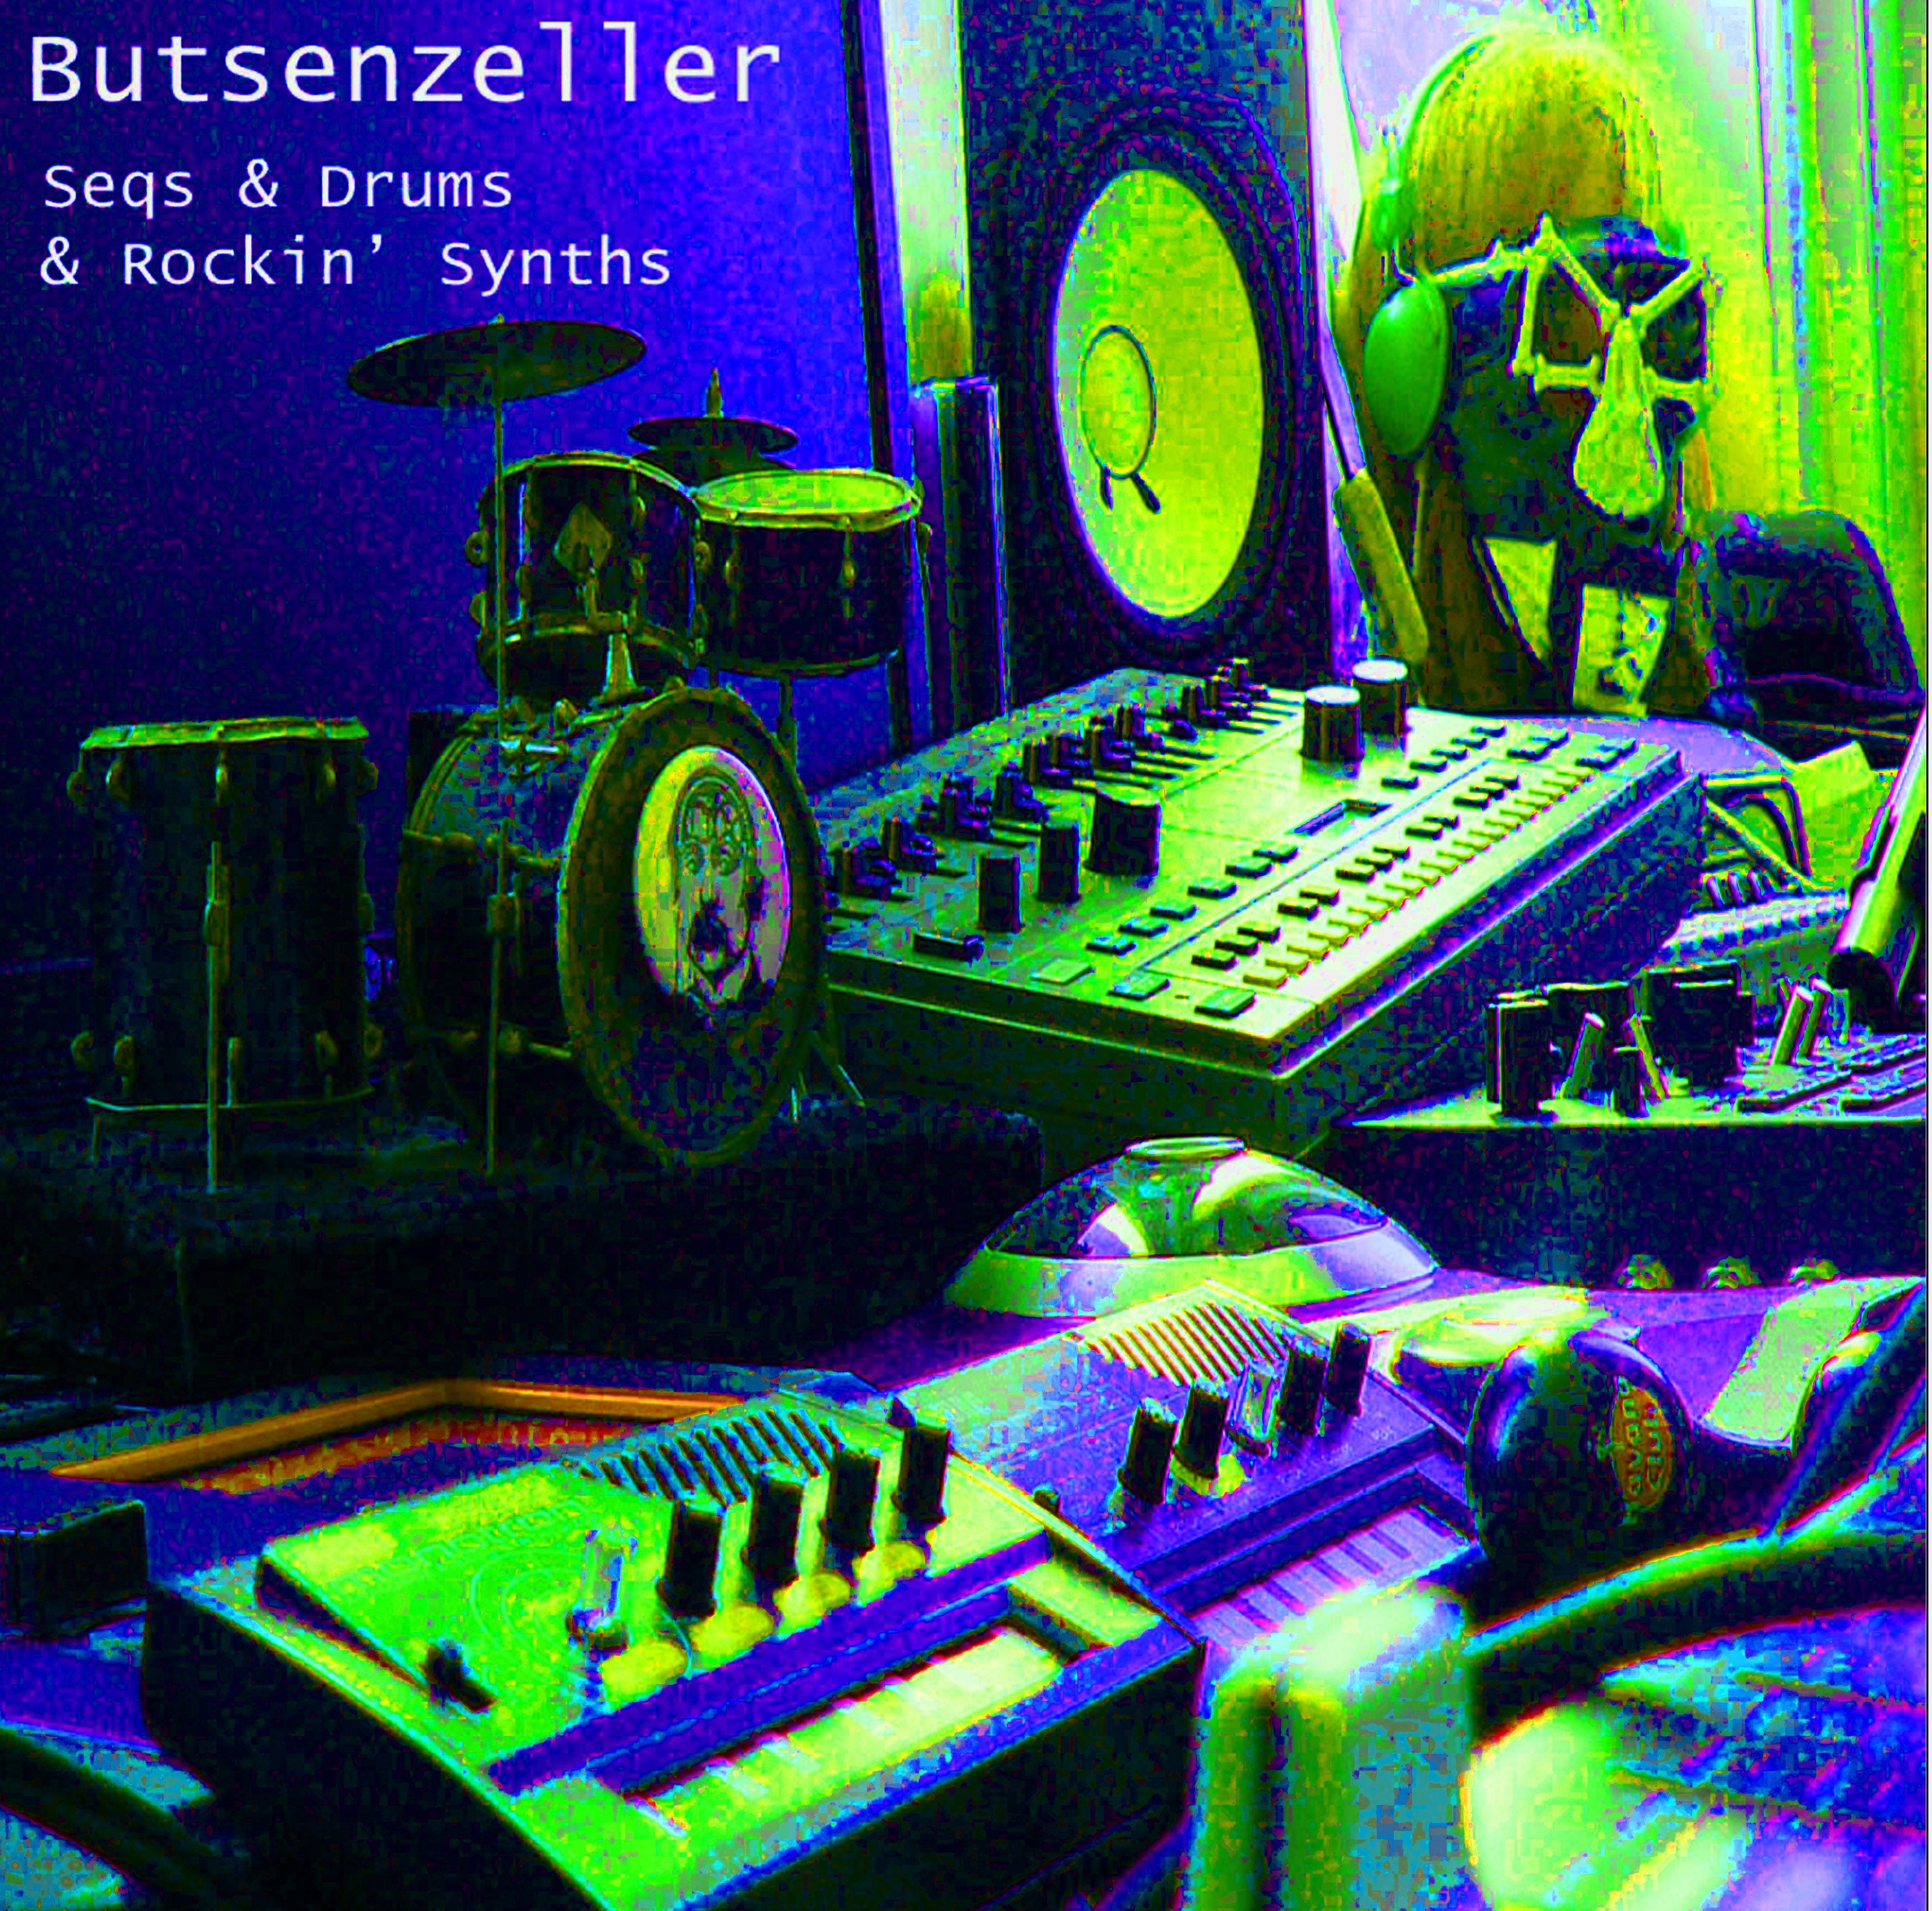 Butsenzeller - Seqs & Drums & Rockin' Synths front cover